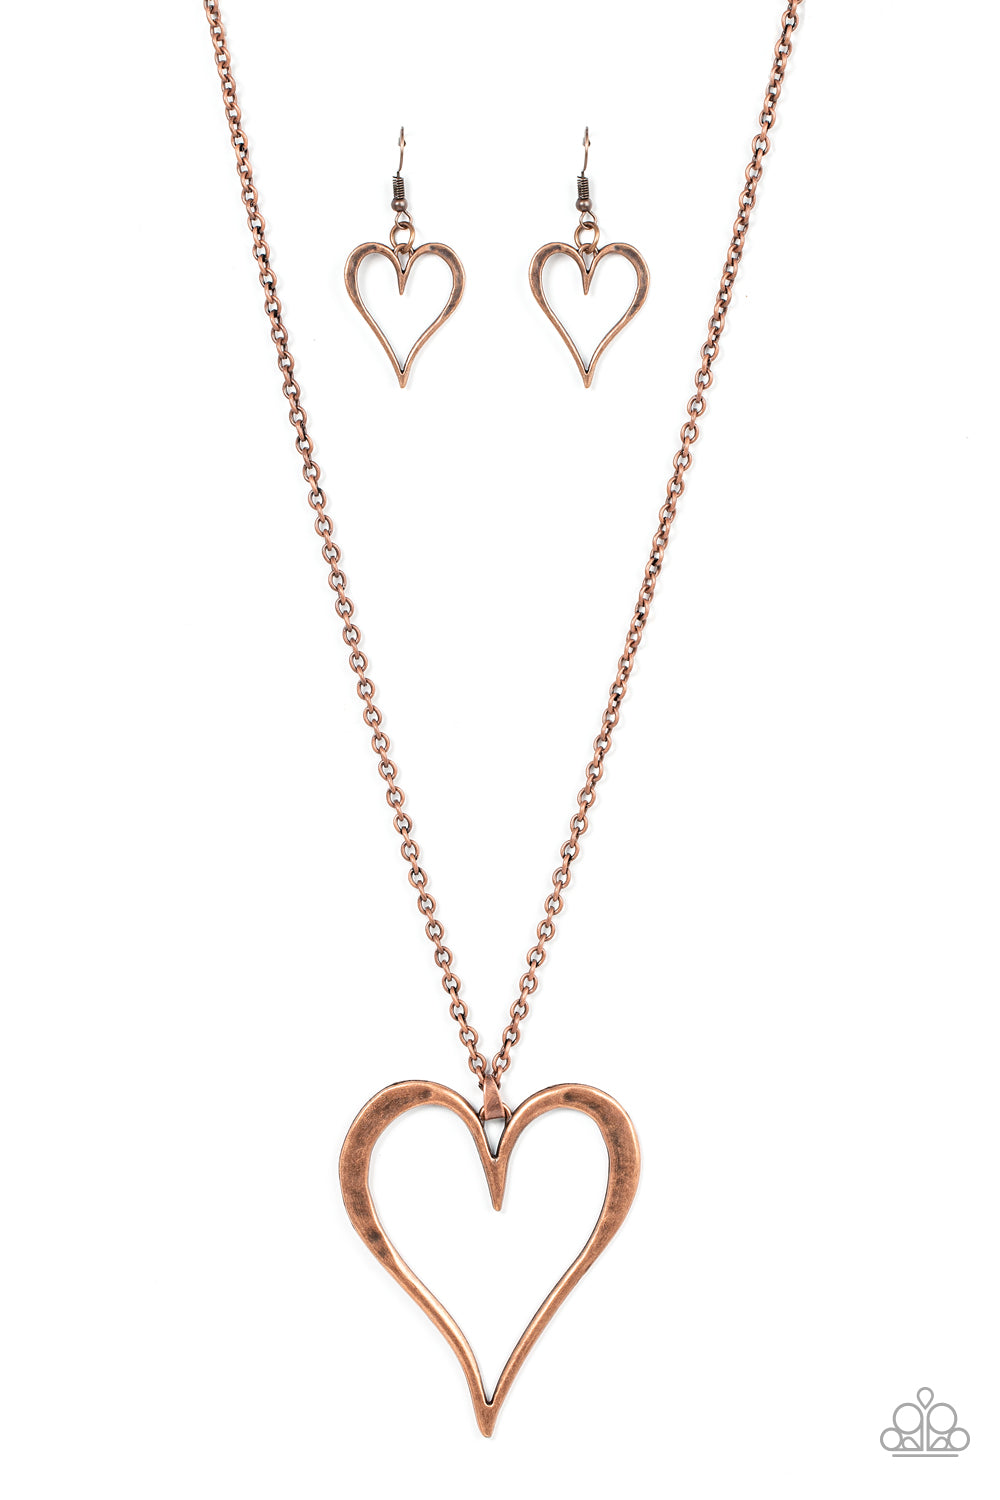 Husarbejde Regenerativ Halvtreds Paparazzi Accessories: Hopelessly In Love - Copper Heart Necklace – Jewels  N' Thingz Boutique